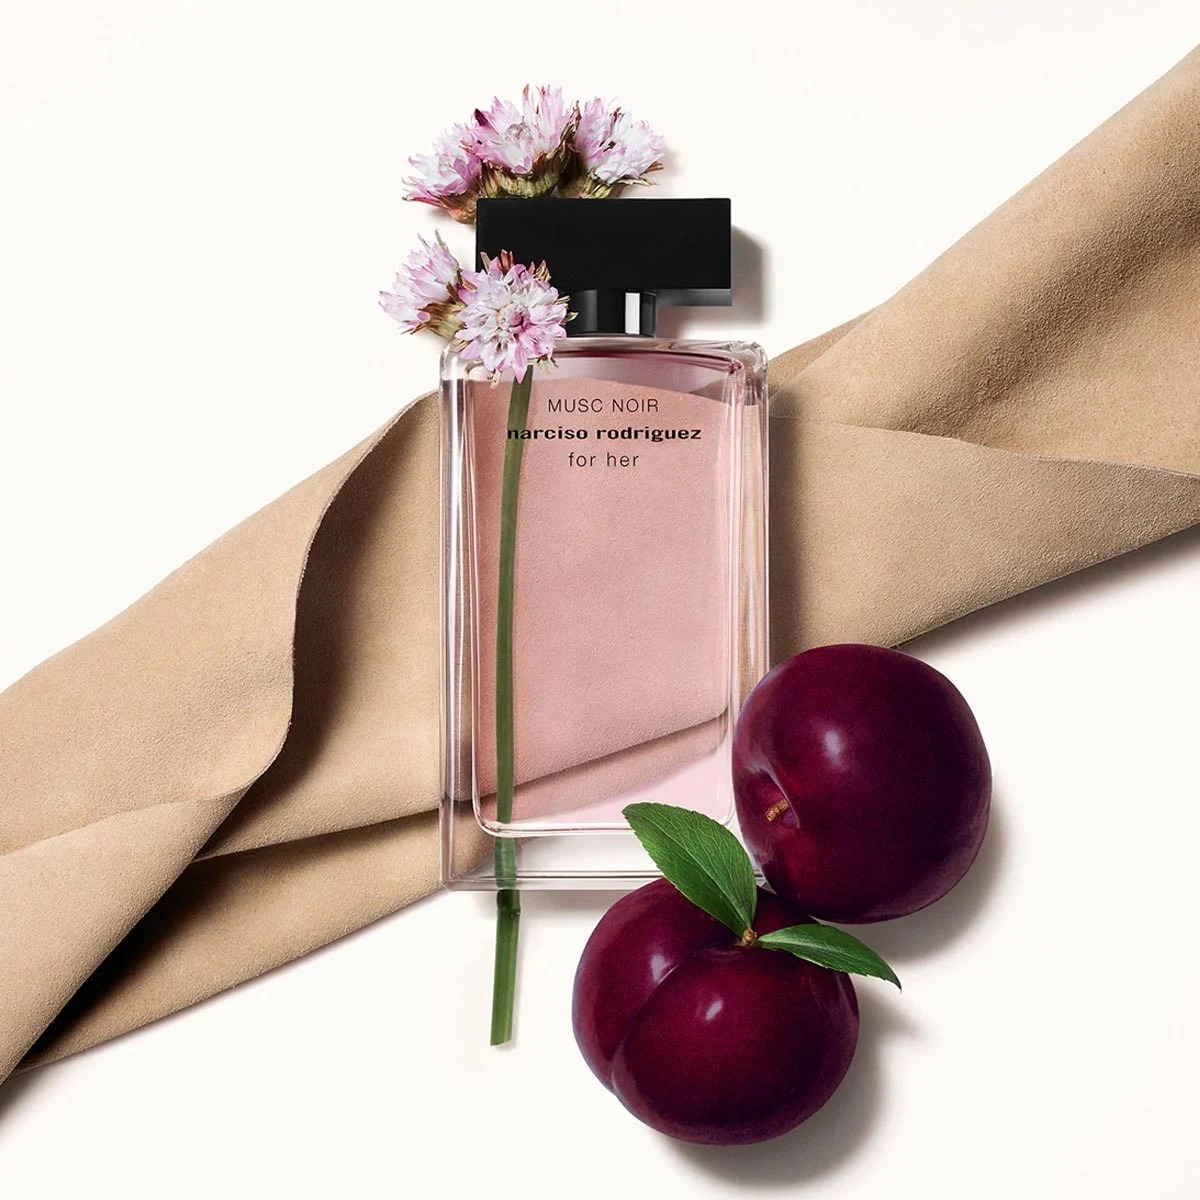 nuoc hoa narciso rodriguez musc noir rose for her